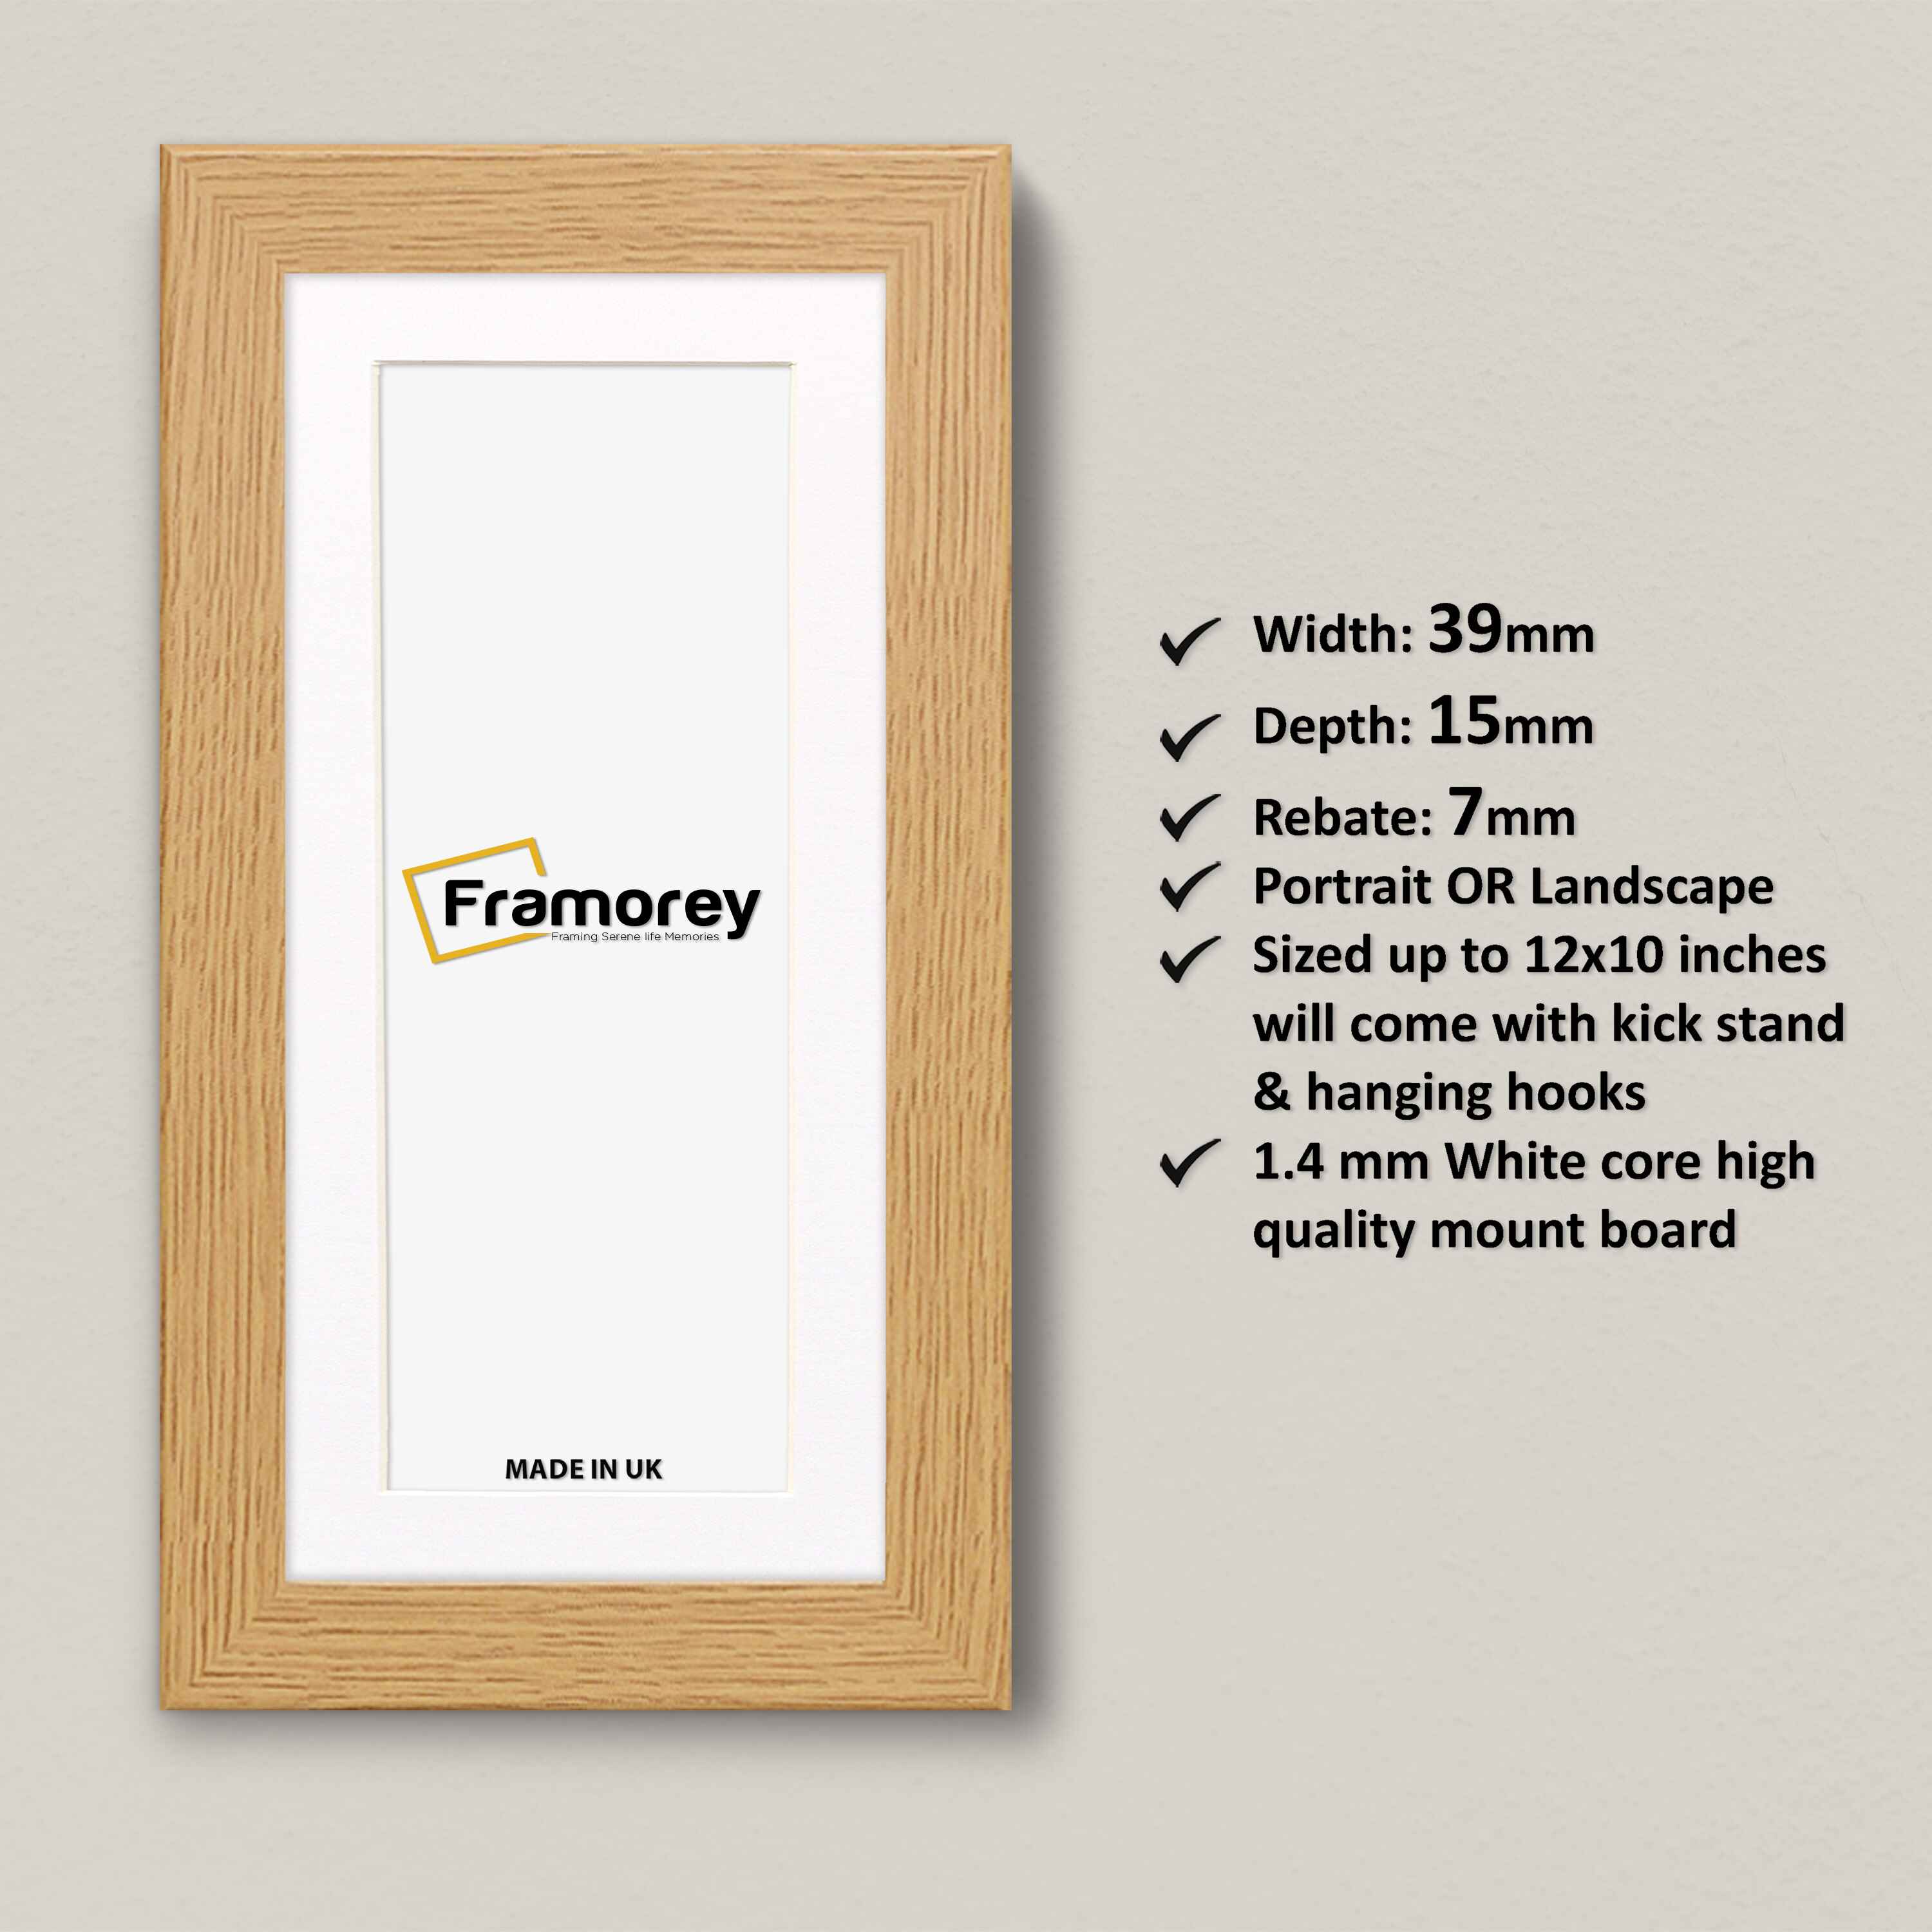 Panoramic Size Oak Picture Frames Handmade Wooden Poster Frames With White Mount